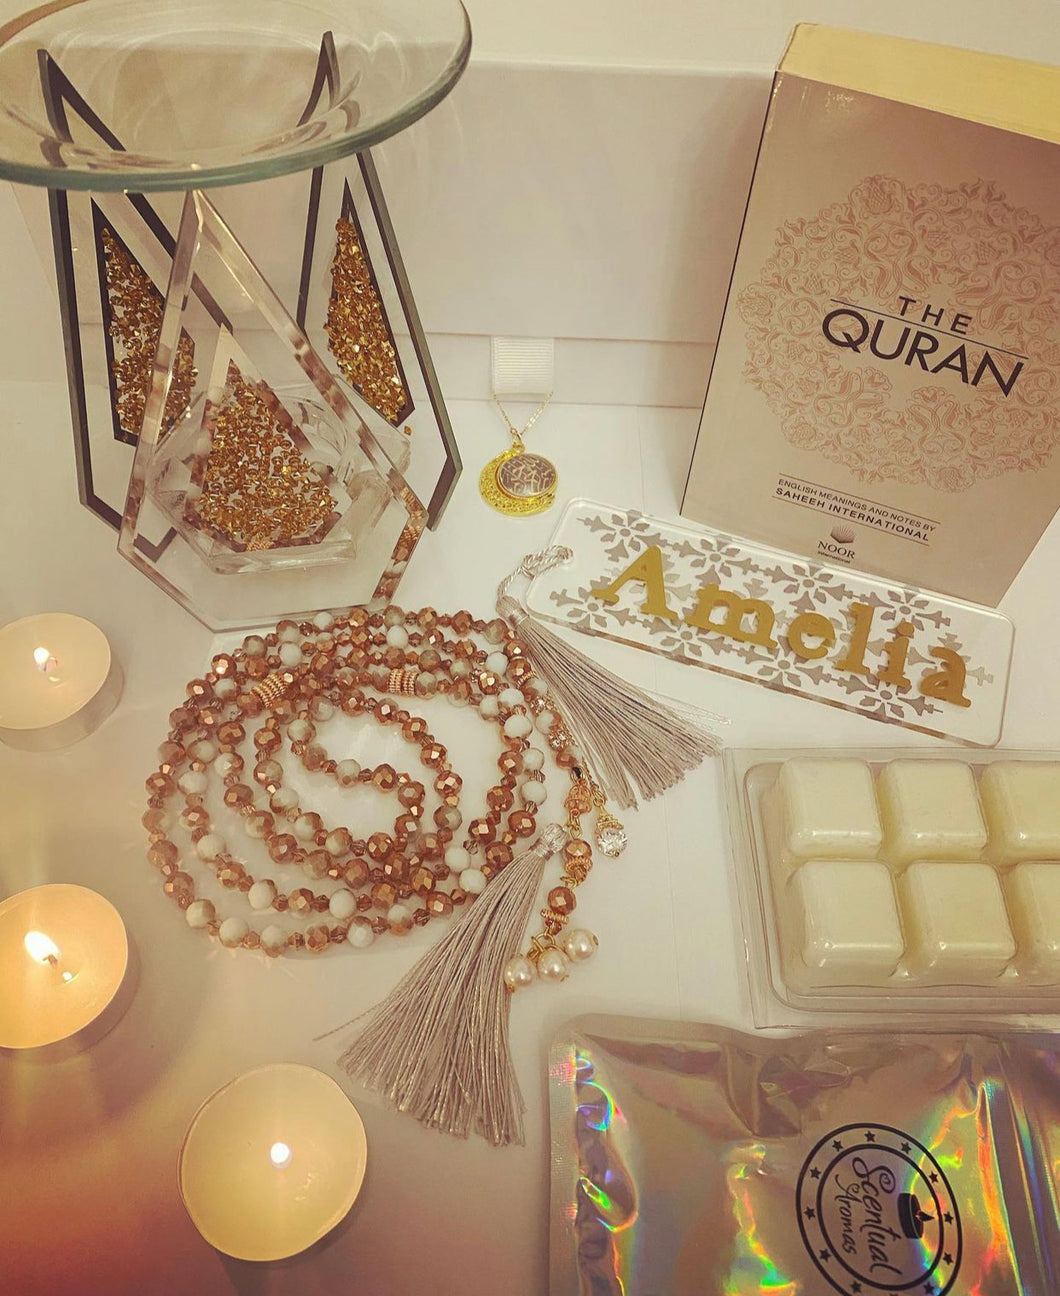 Personalised Deluxe Oil / Wax Burner gift set - Tasbih , Bookmark, Scents and More